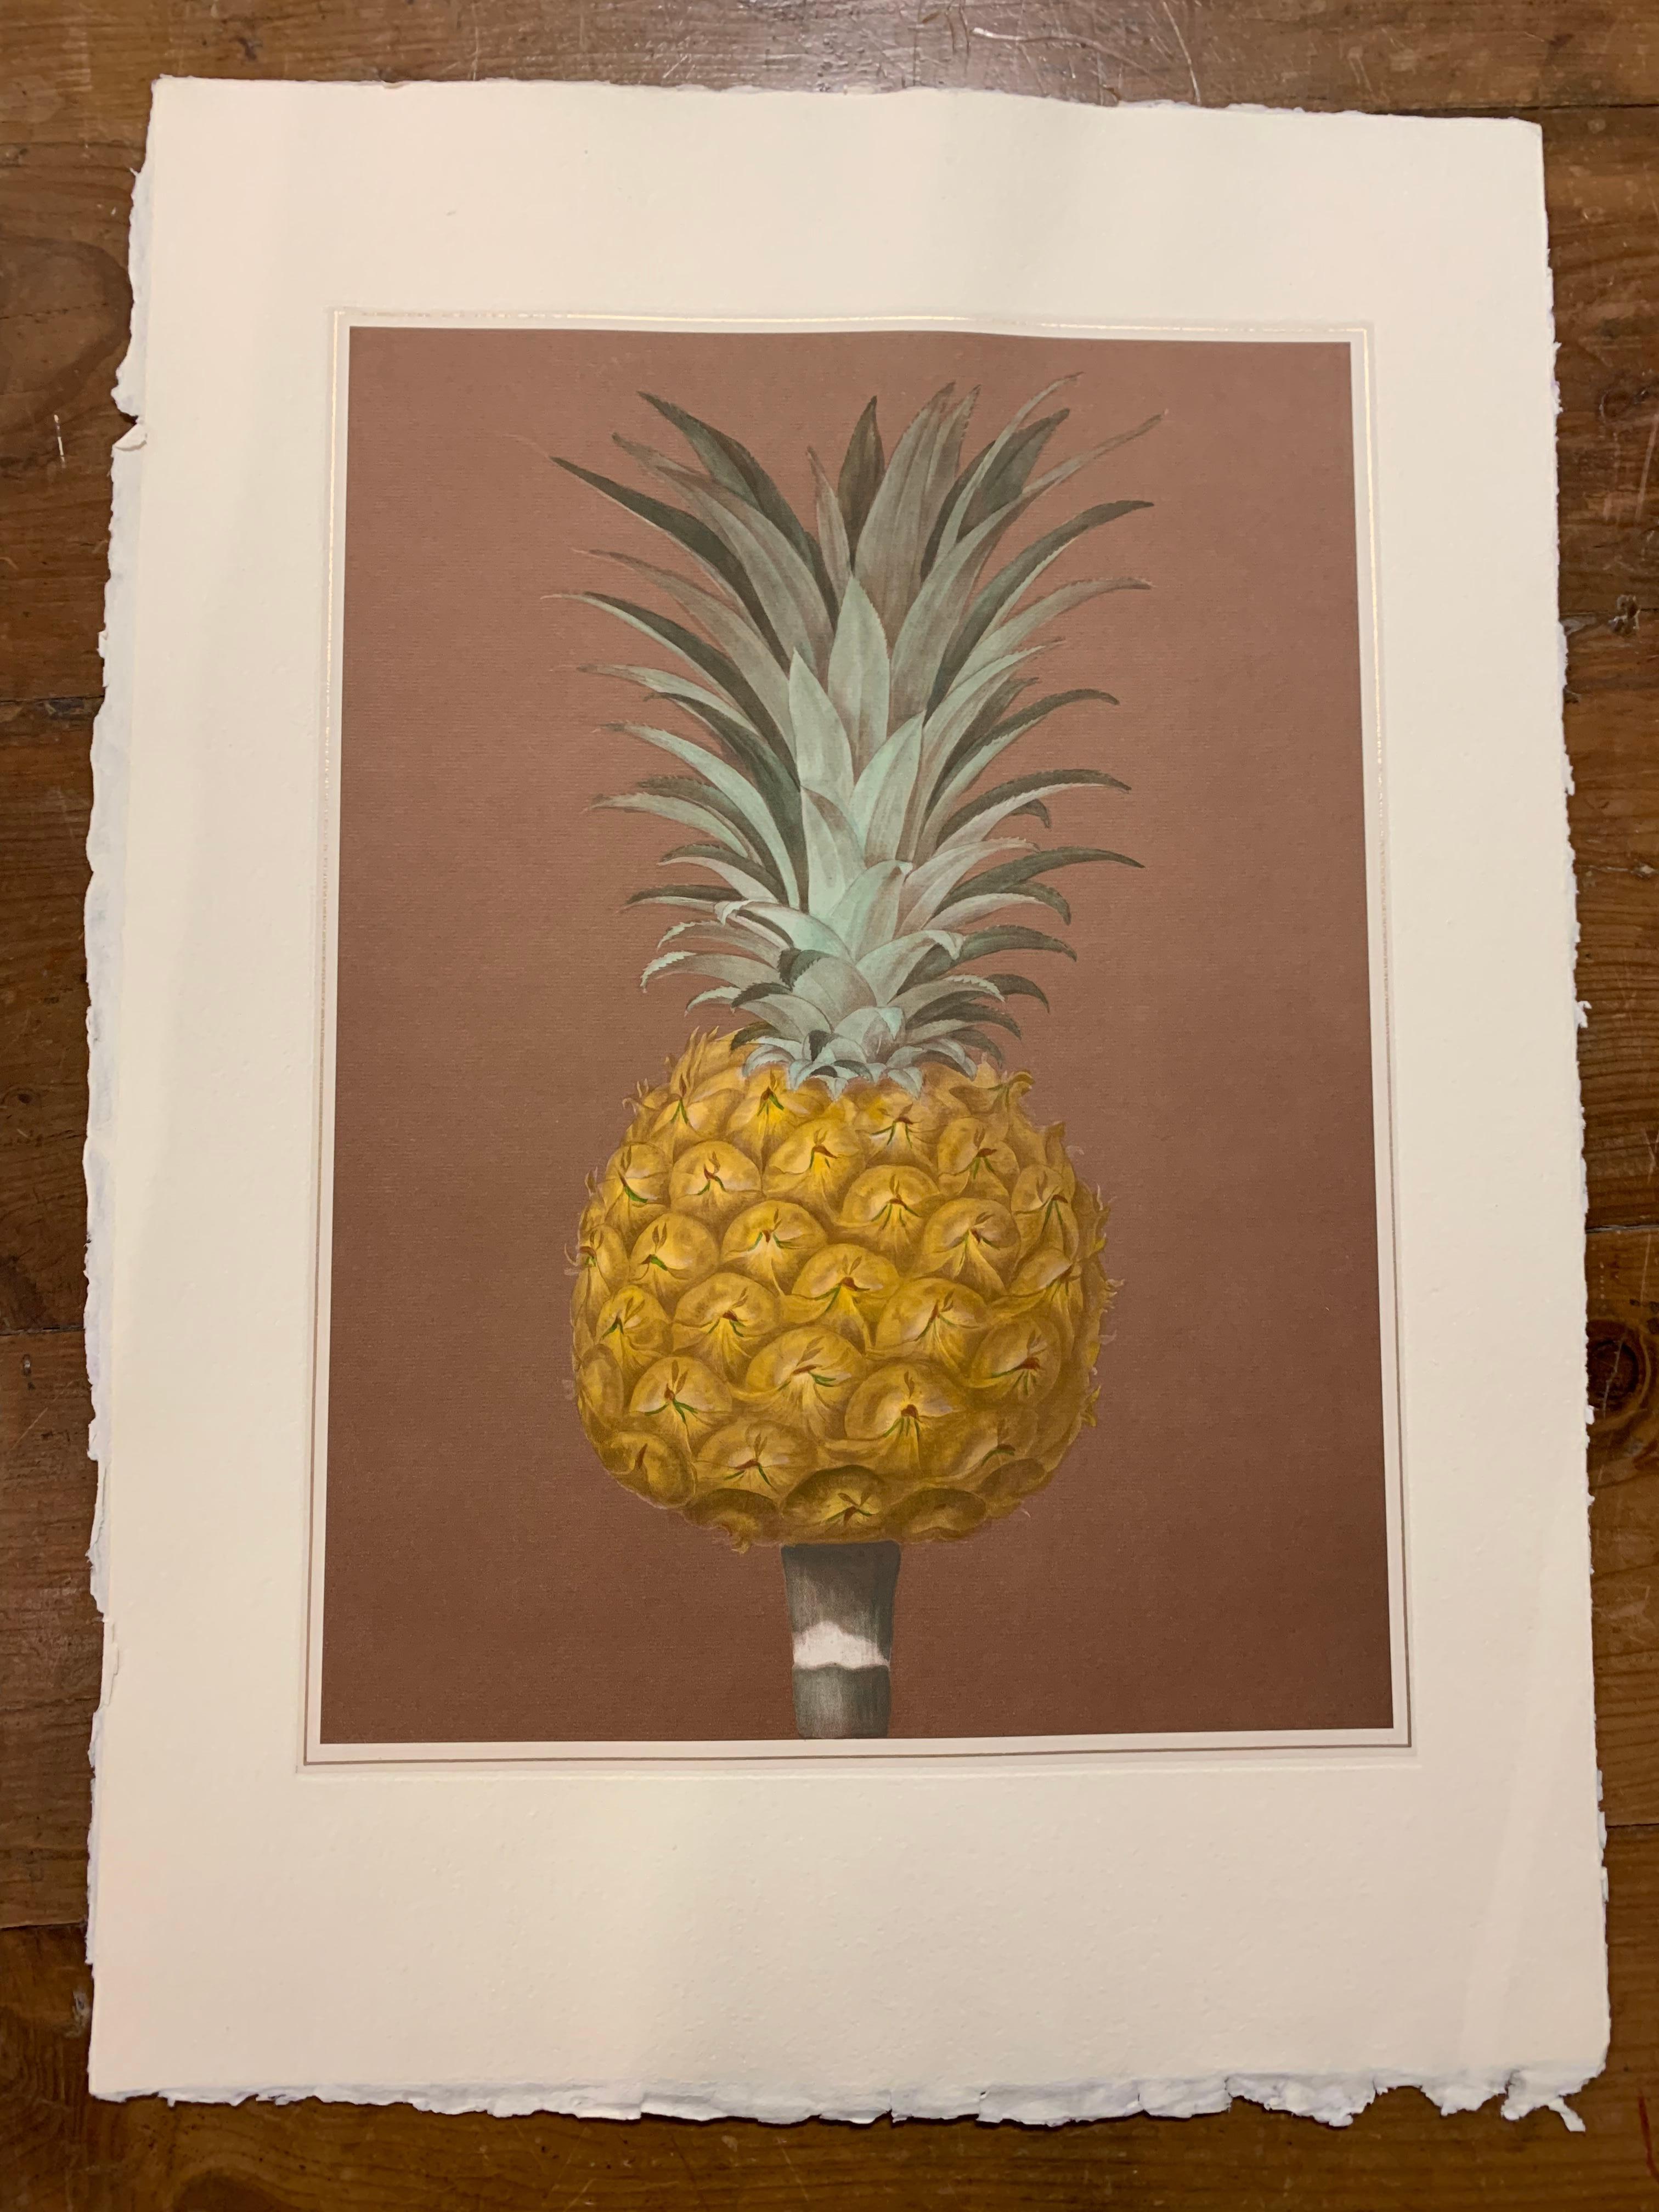 Handcoloured print entirely made in Florence, Italy by master craftsmen using an antique press and artisanal paper and showing a pineapple. The stylish black mat has gold detailing. Frame made with antique mirror inserts and gold leaf border. Two